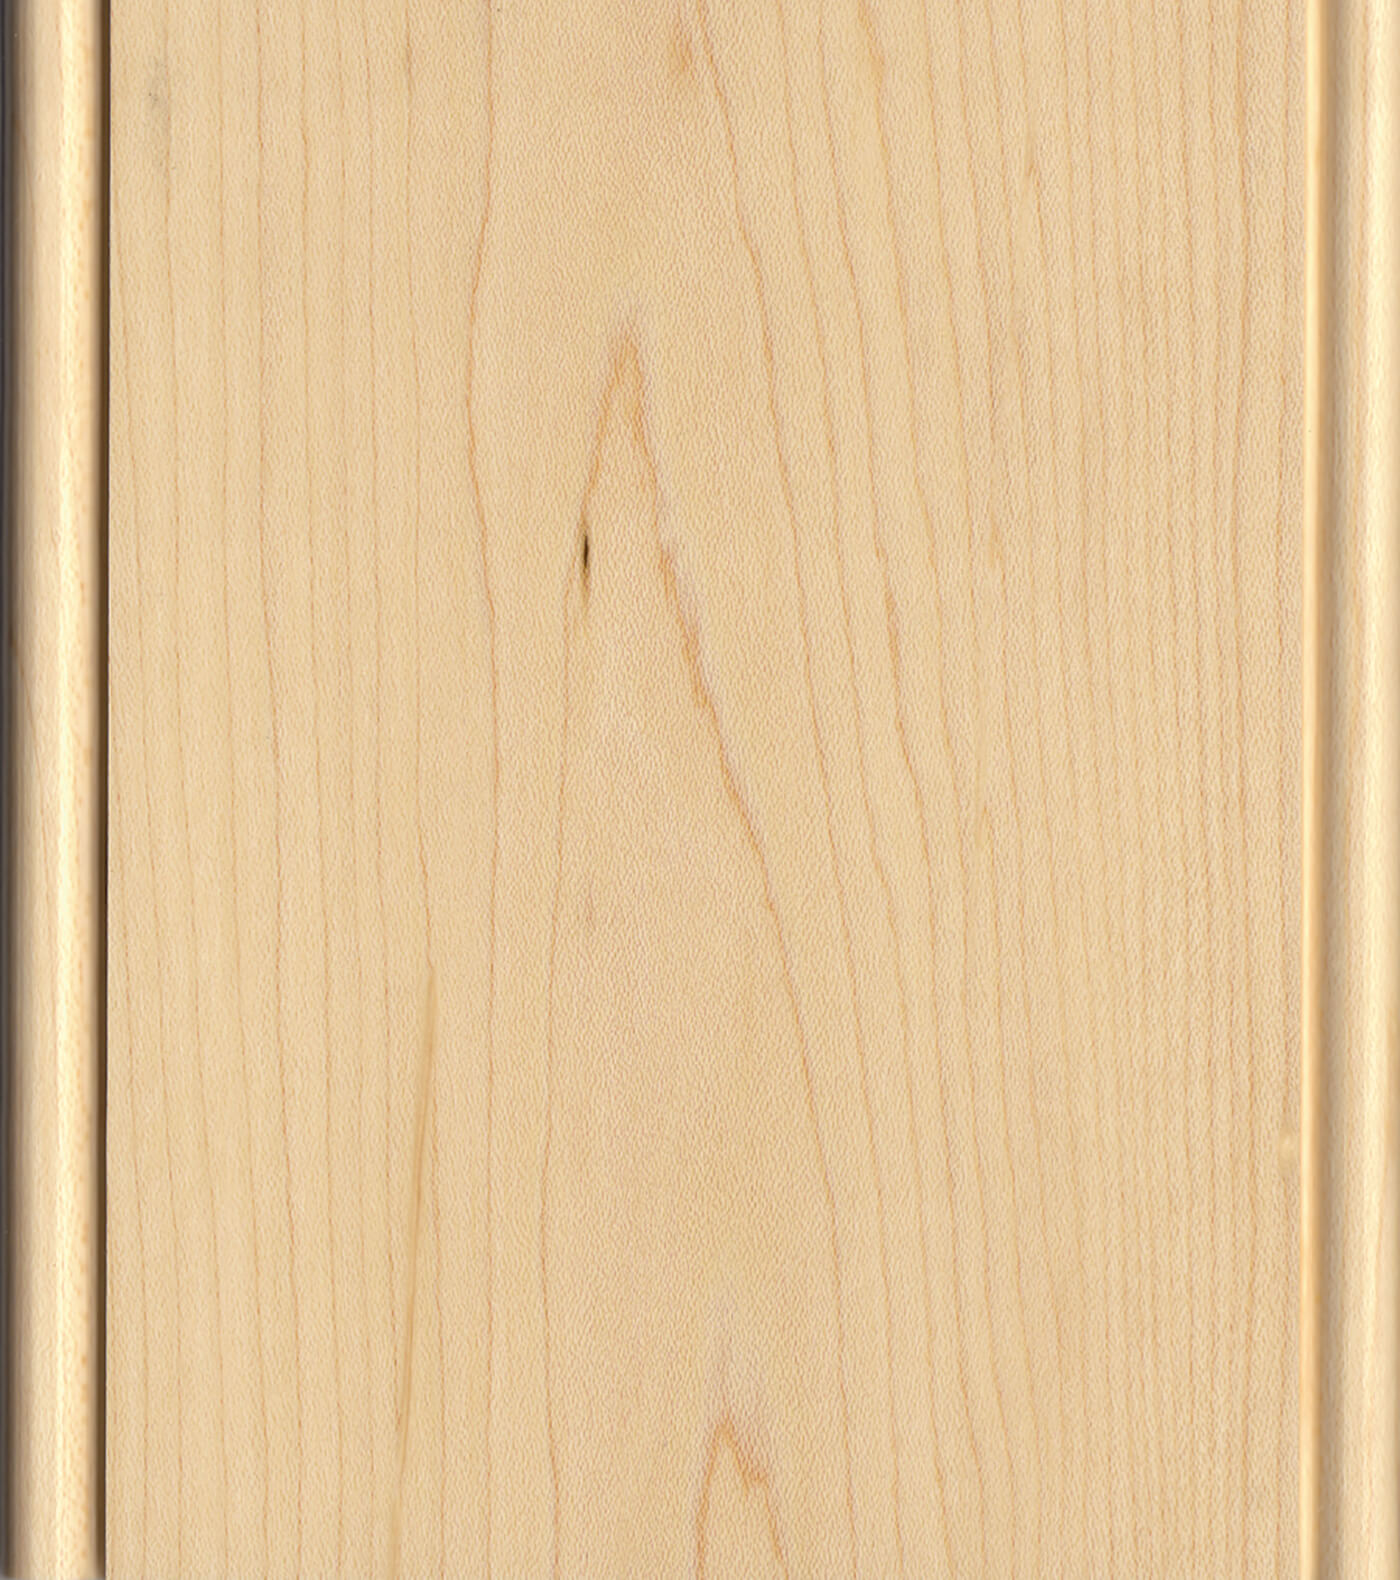 Natural Finish on Maple